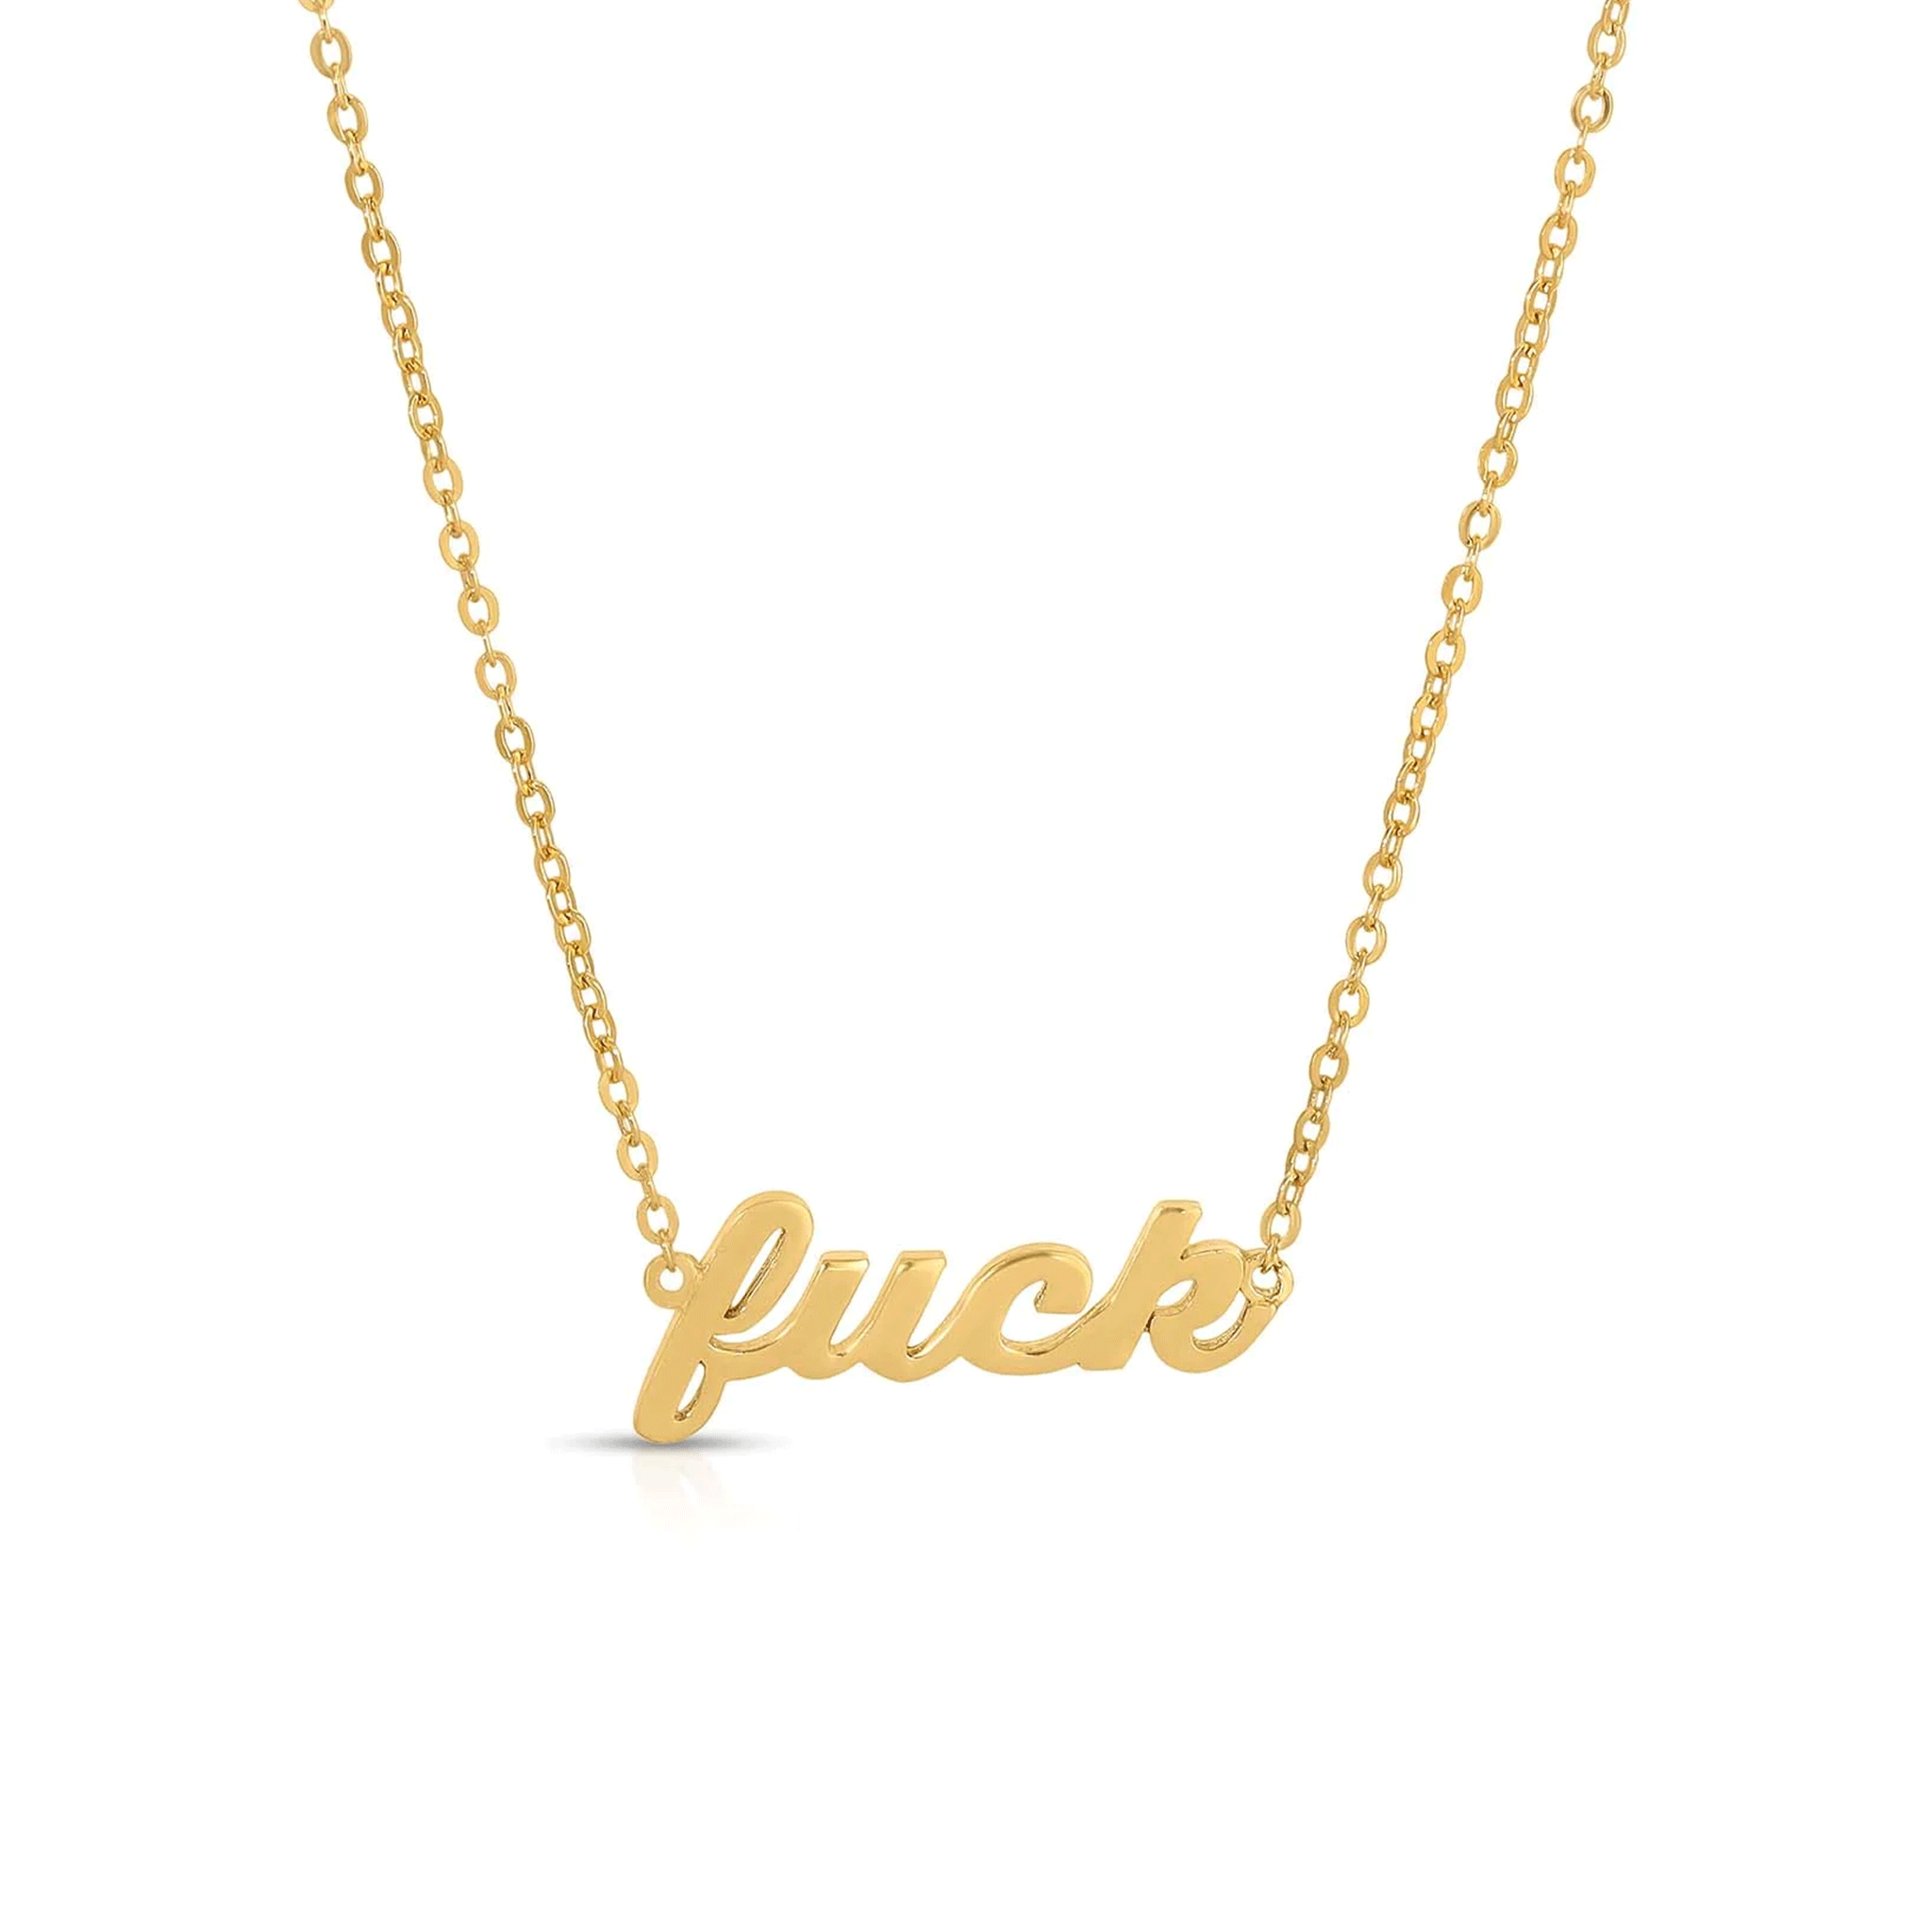 A gold chain necklace with the word, "fuck" attached as a pendant.